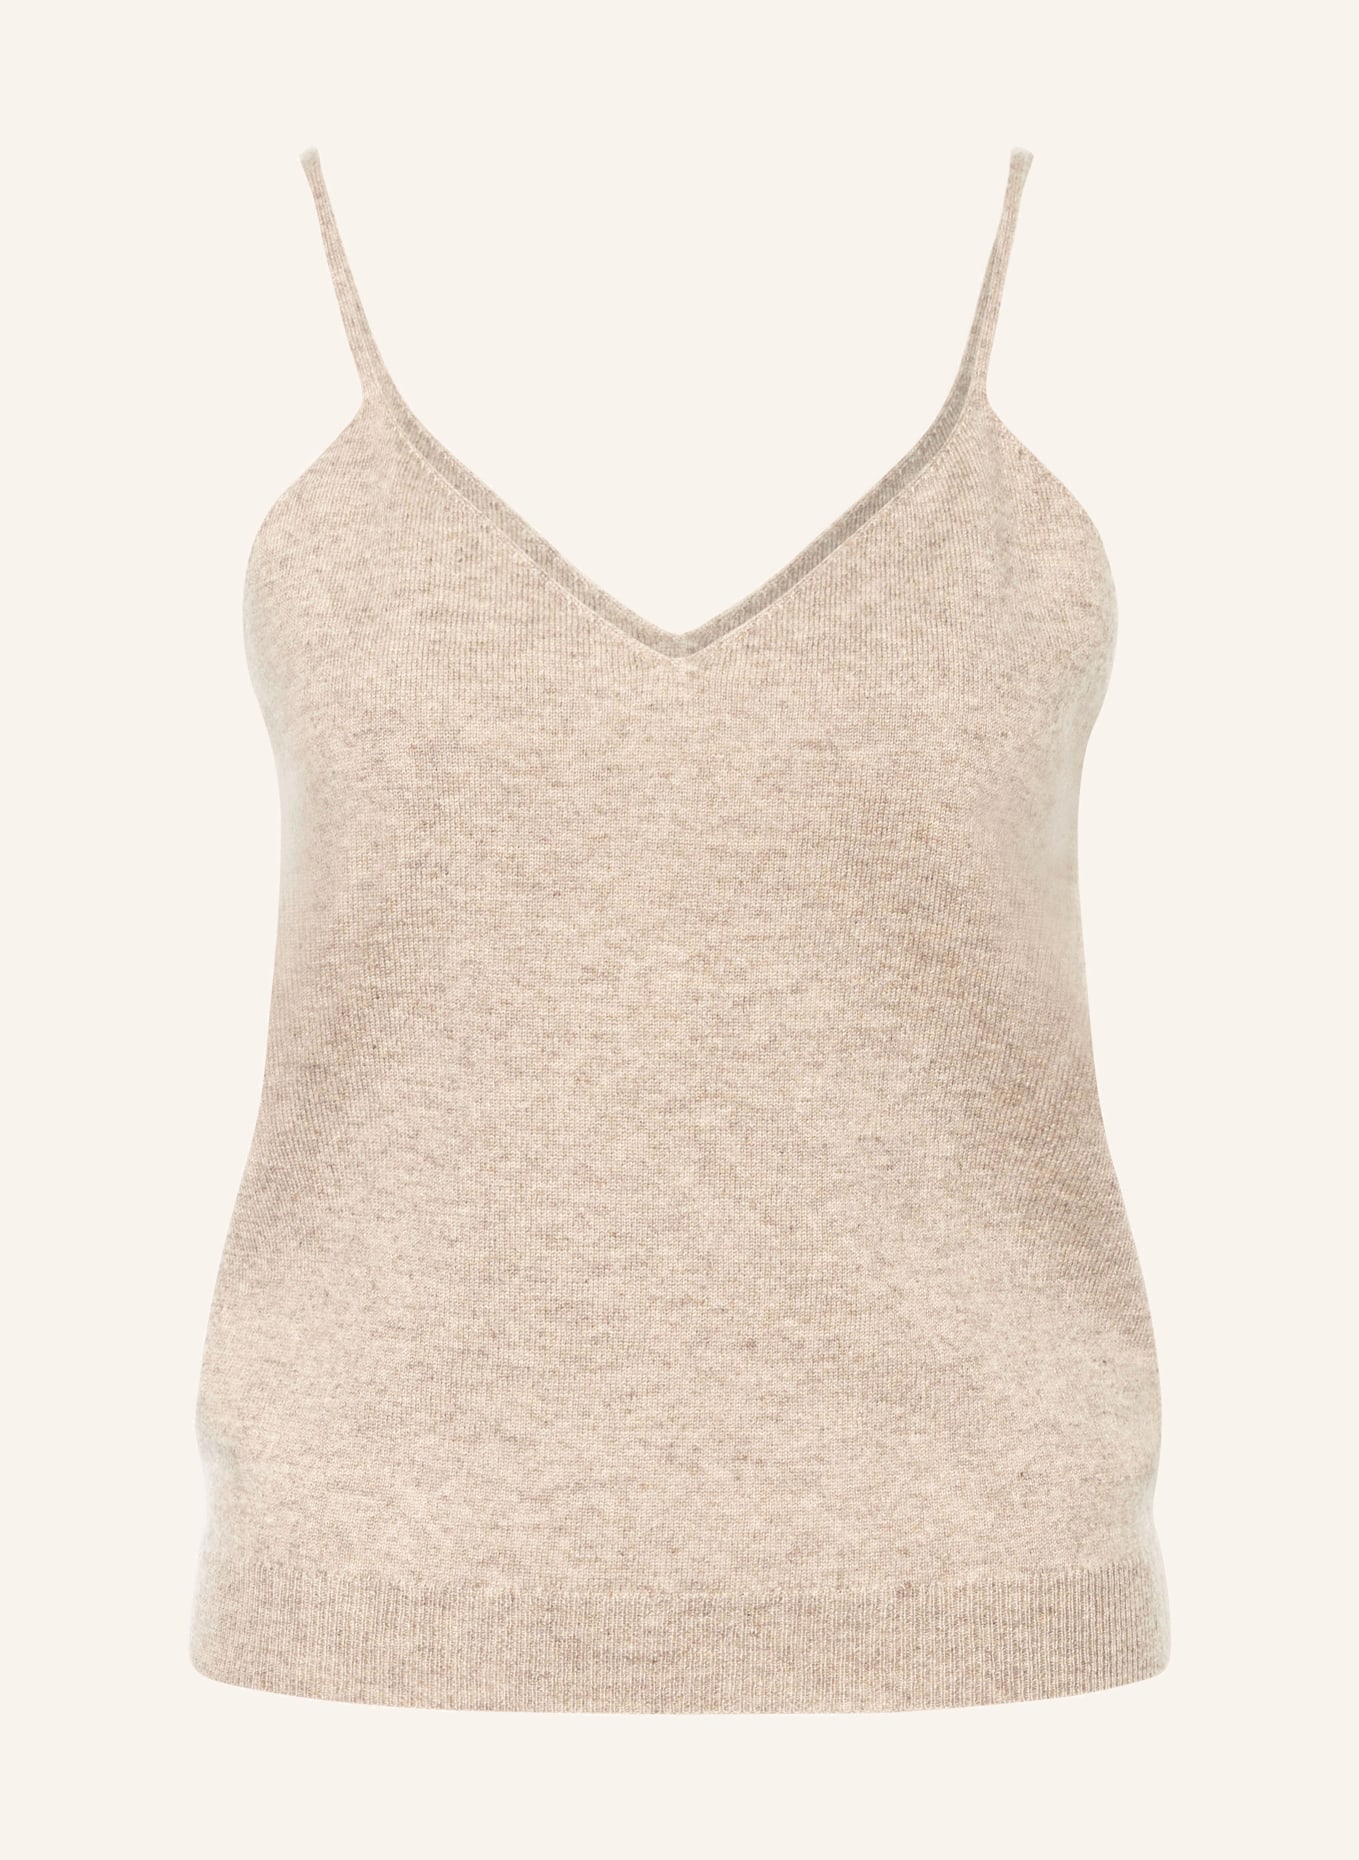 REPEAT Knit top in cashmere, Color: BEIGE/ LIGHT BROWN (Image 1)